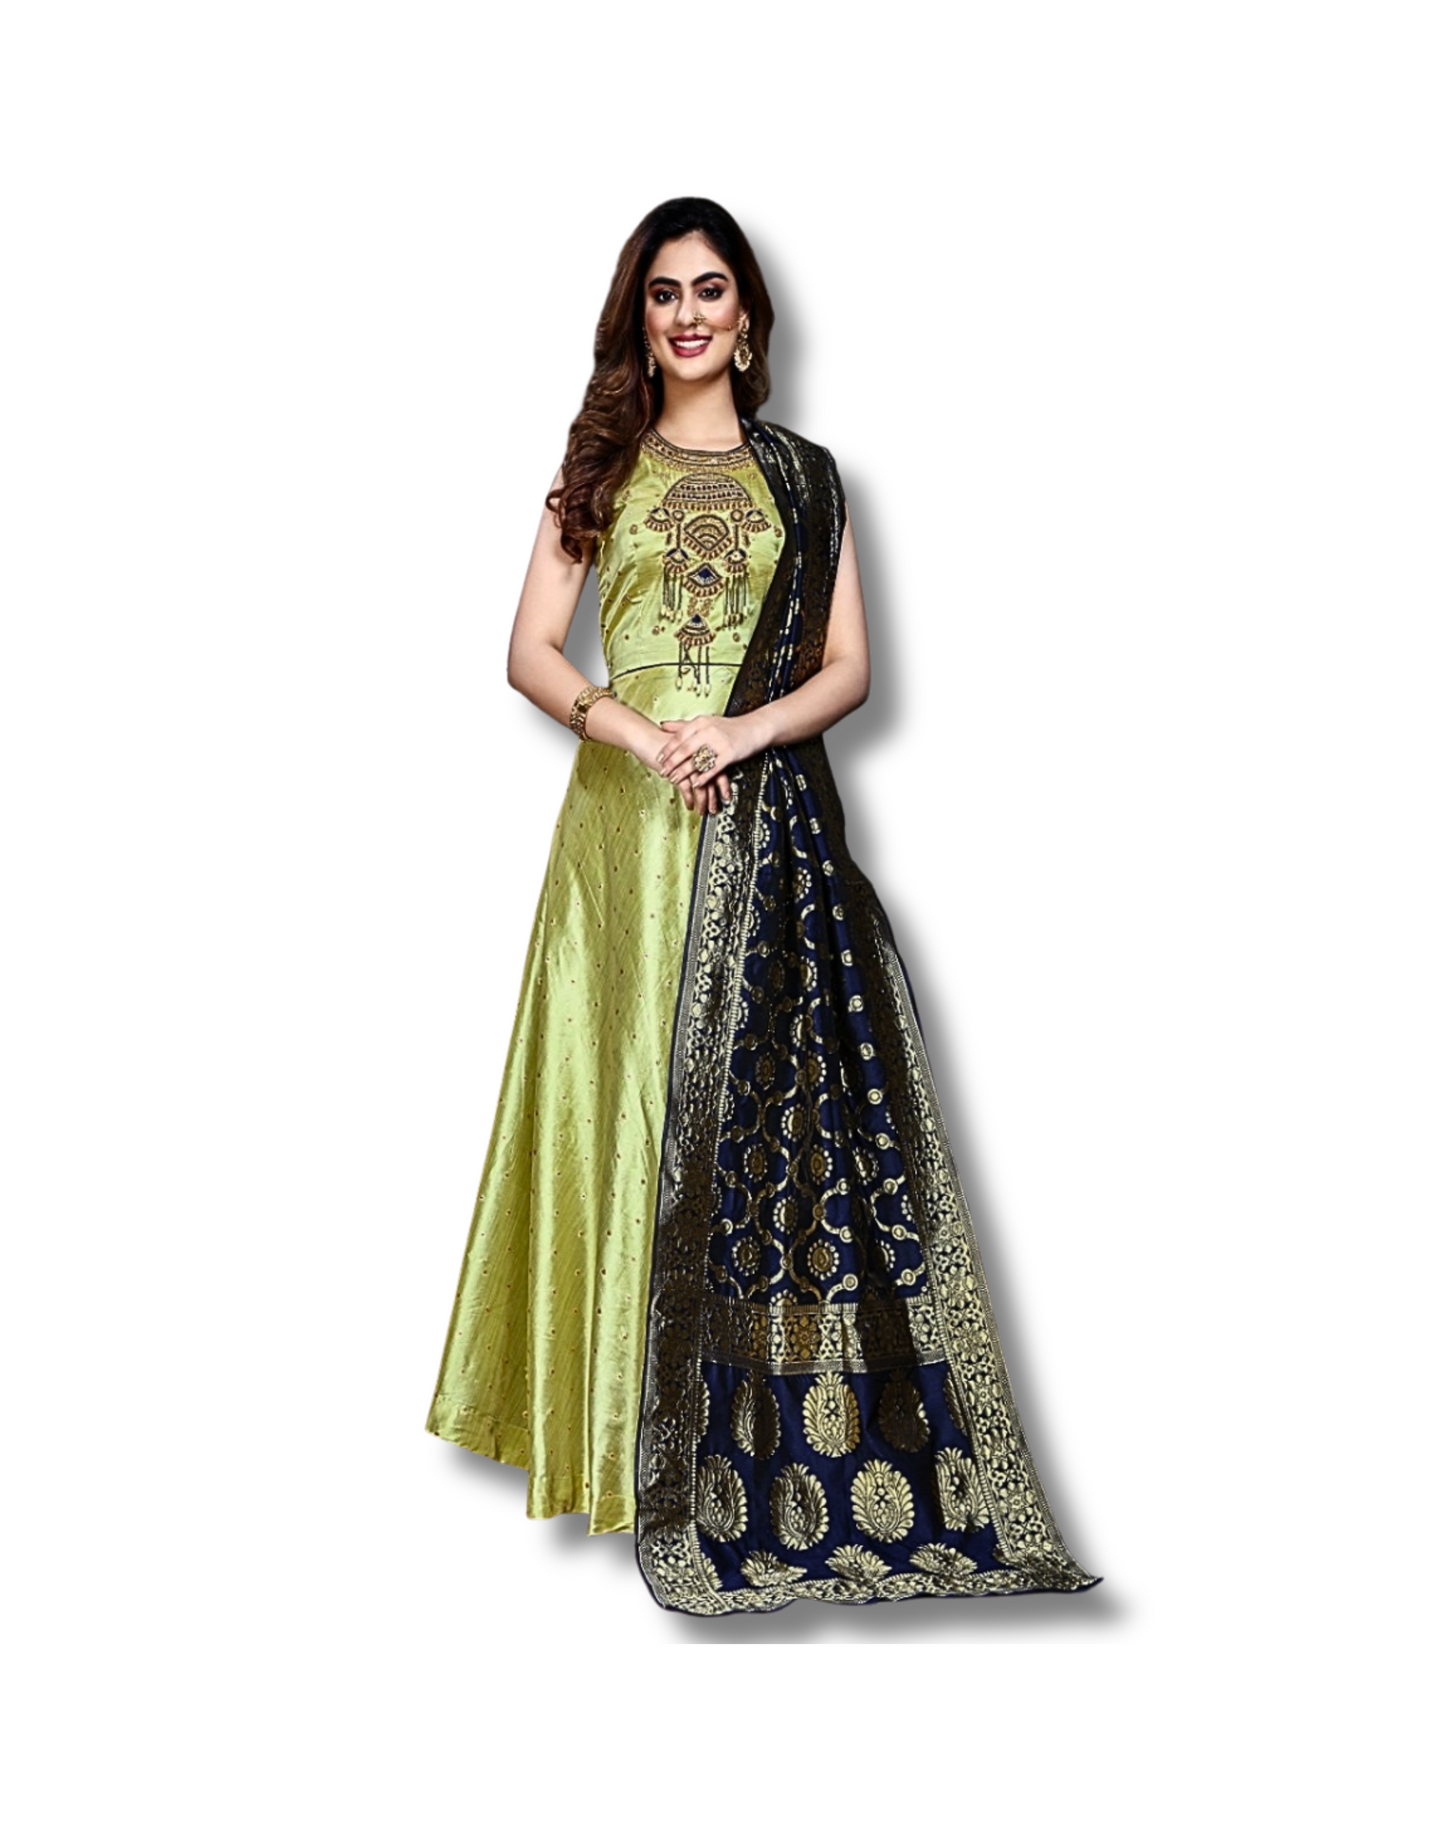 "Verde Royale: Green Bamboo Silk Ethnic Gown for Women"